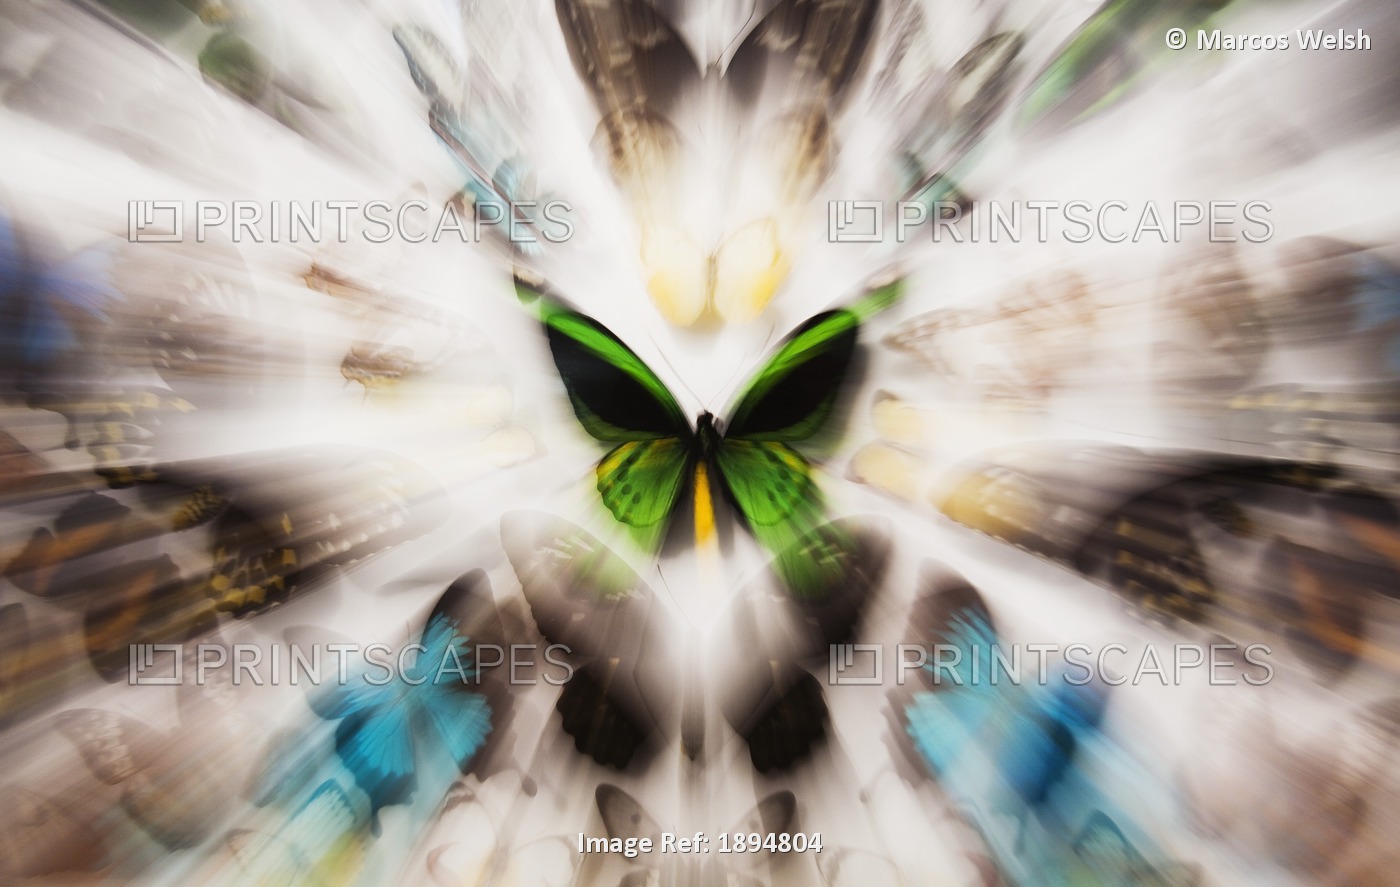 Focus On A Green Butterfly With Images Of Butterflies Surrounding It